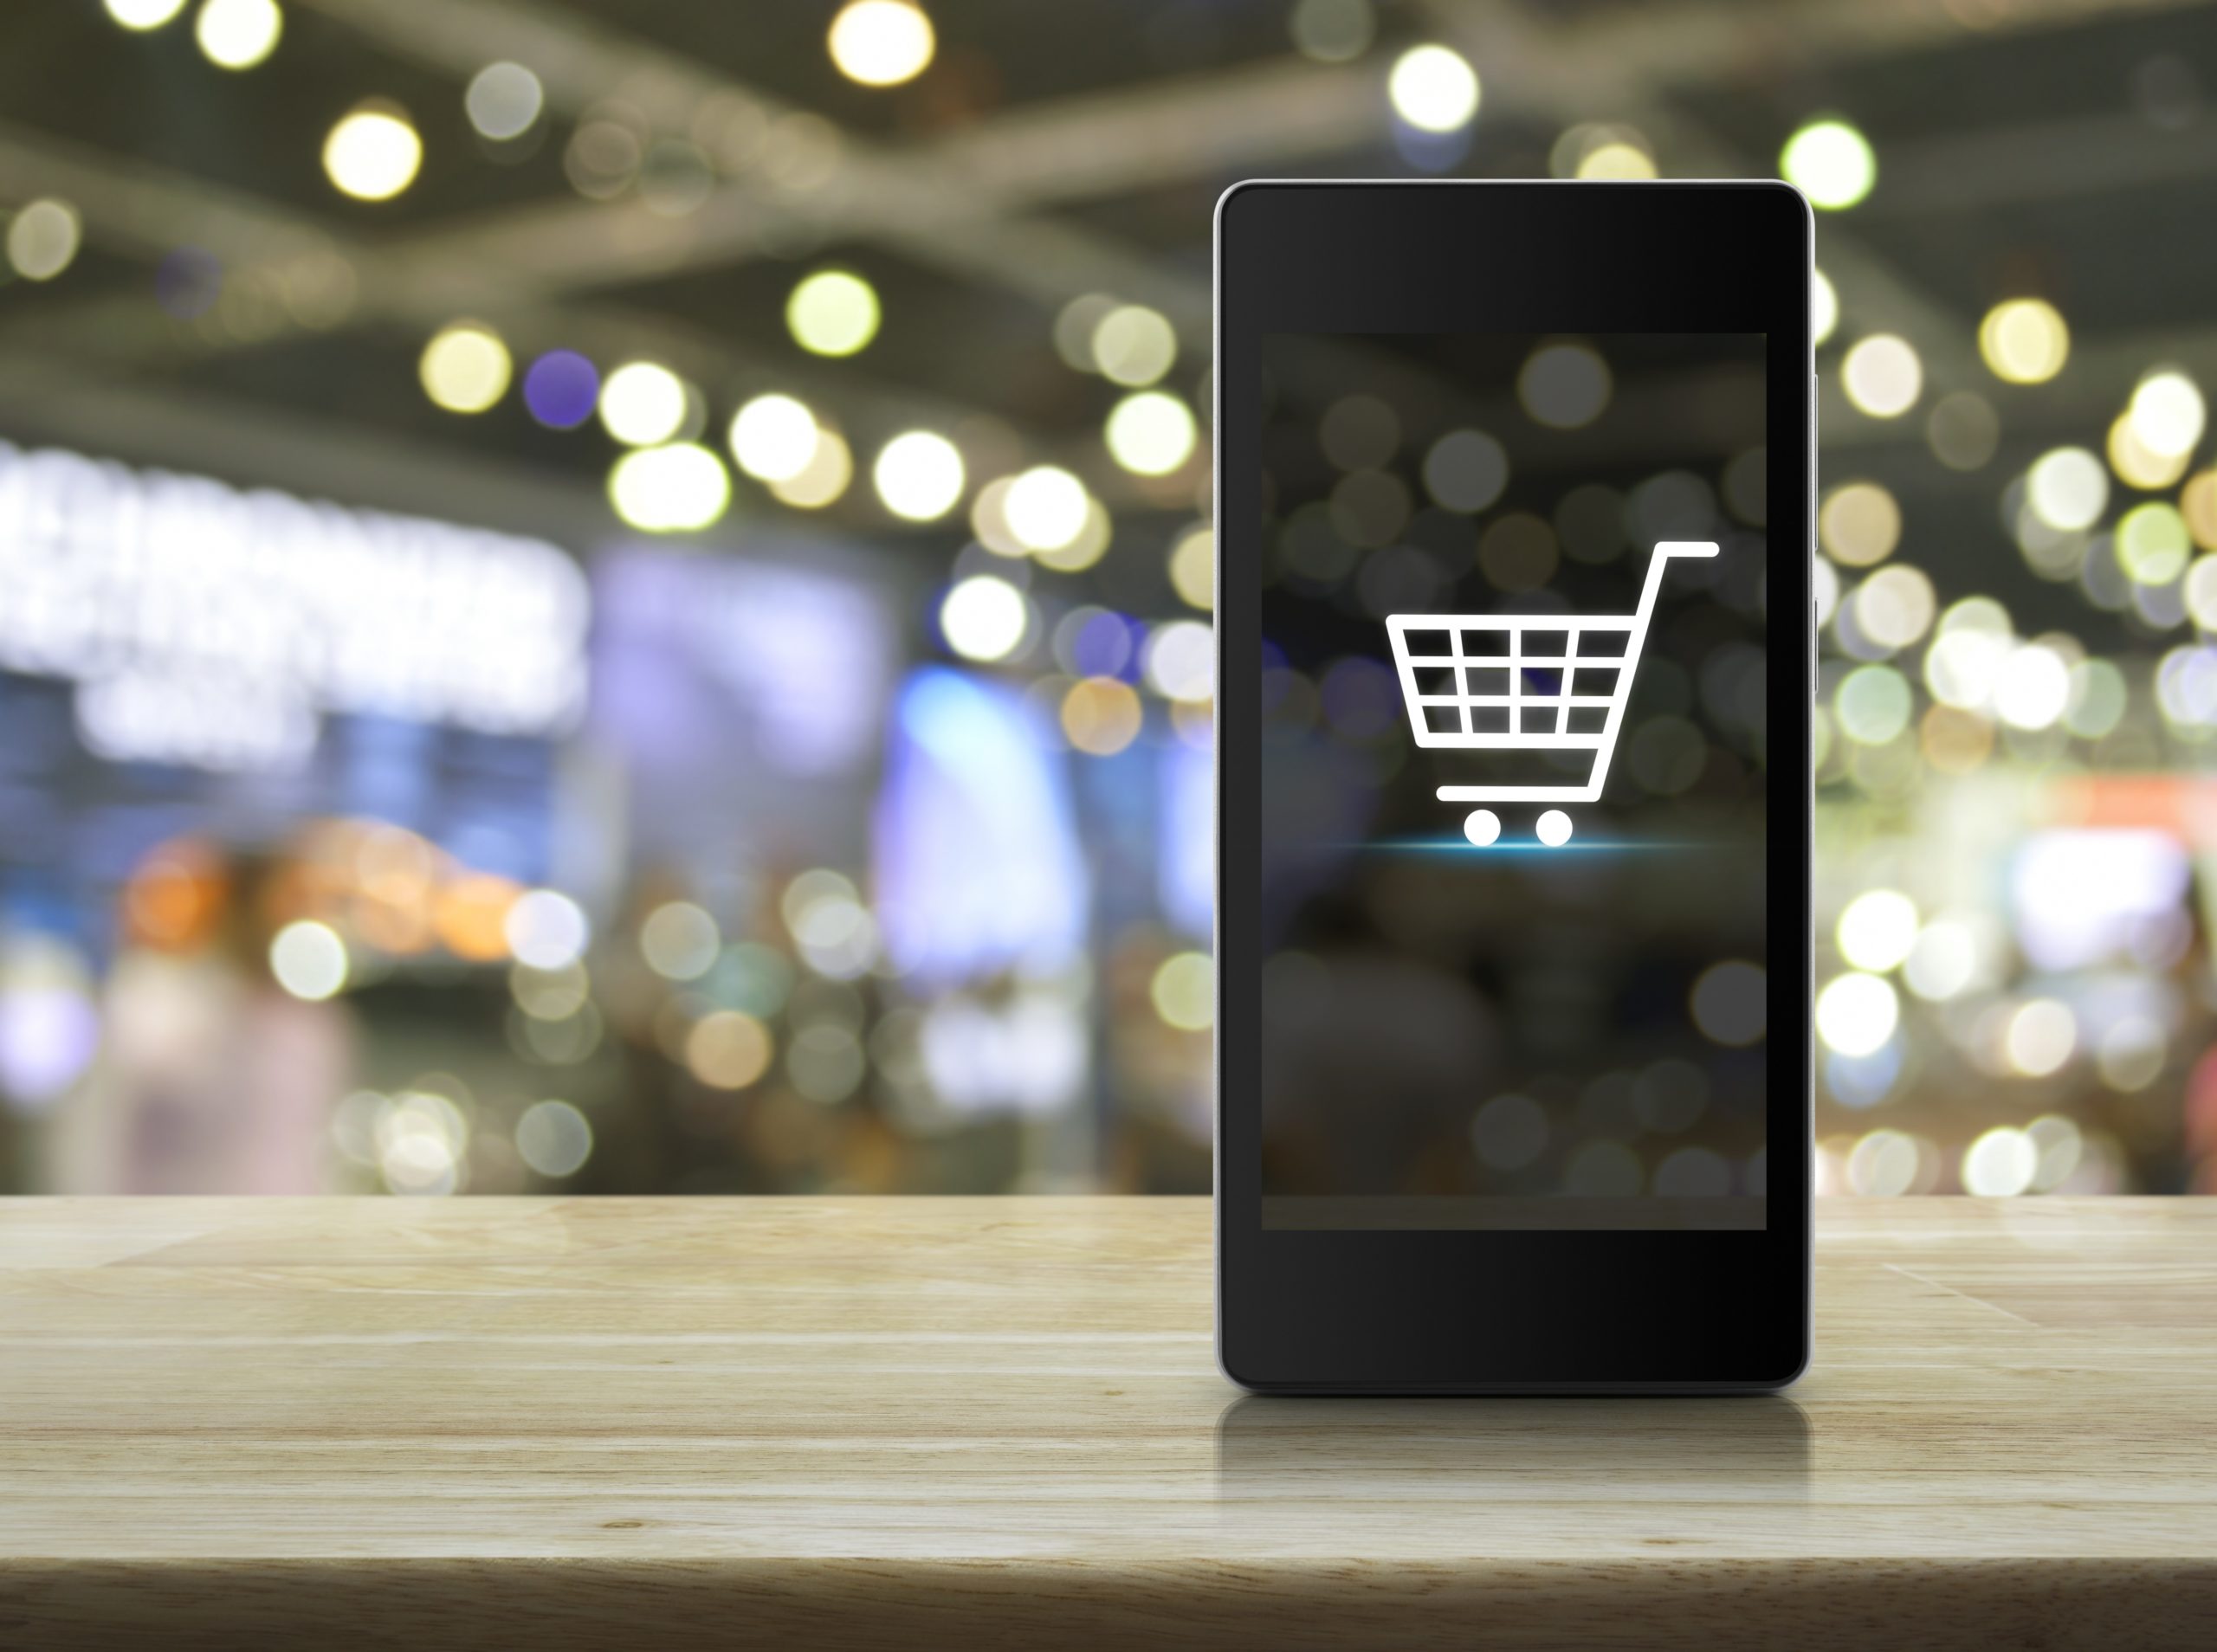 [Webinar]: E-commerce Strategies to Grow Your Business